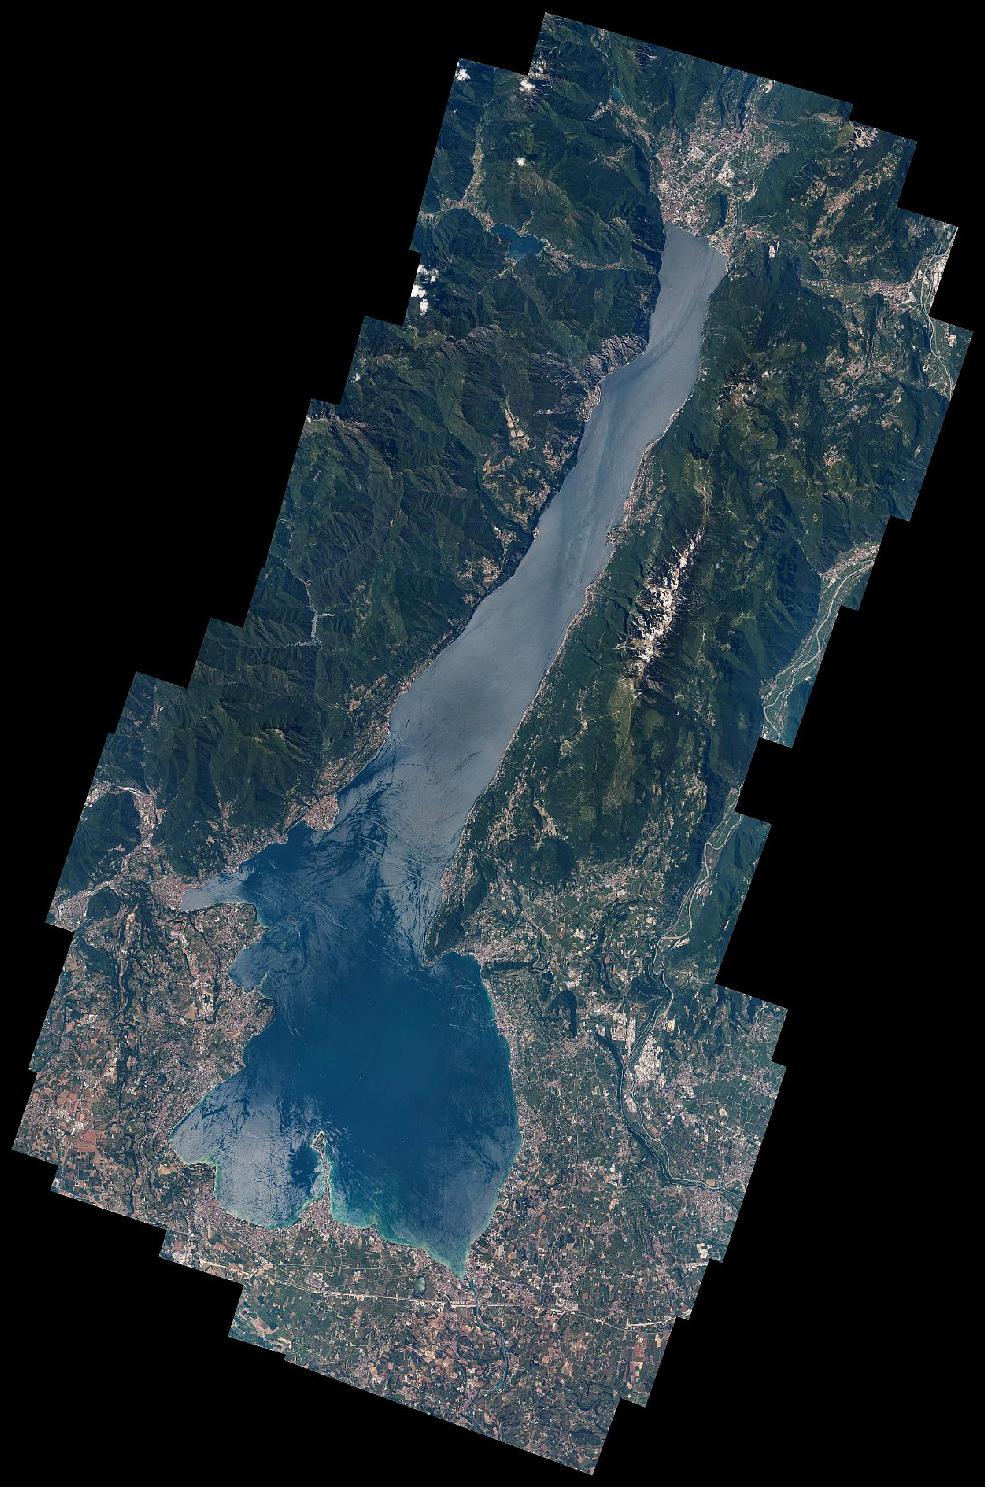 Figure 54: This collage of pictures shows Lago di Garda in Italy, made from many pictures mapped together, digitally rotated and assembled into this large collage of 17584 by 26257 pixels. Thomas asked to have the series of highly zoomed-in pictures aligned into this collage to show the area in detail. The International Space Station flies at roughly 400 km altitude so Thomas uses the longest lenses available onboard (image credit: ESA/NASA–T. Pesquet/W. Harold)